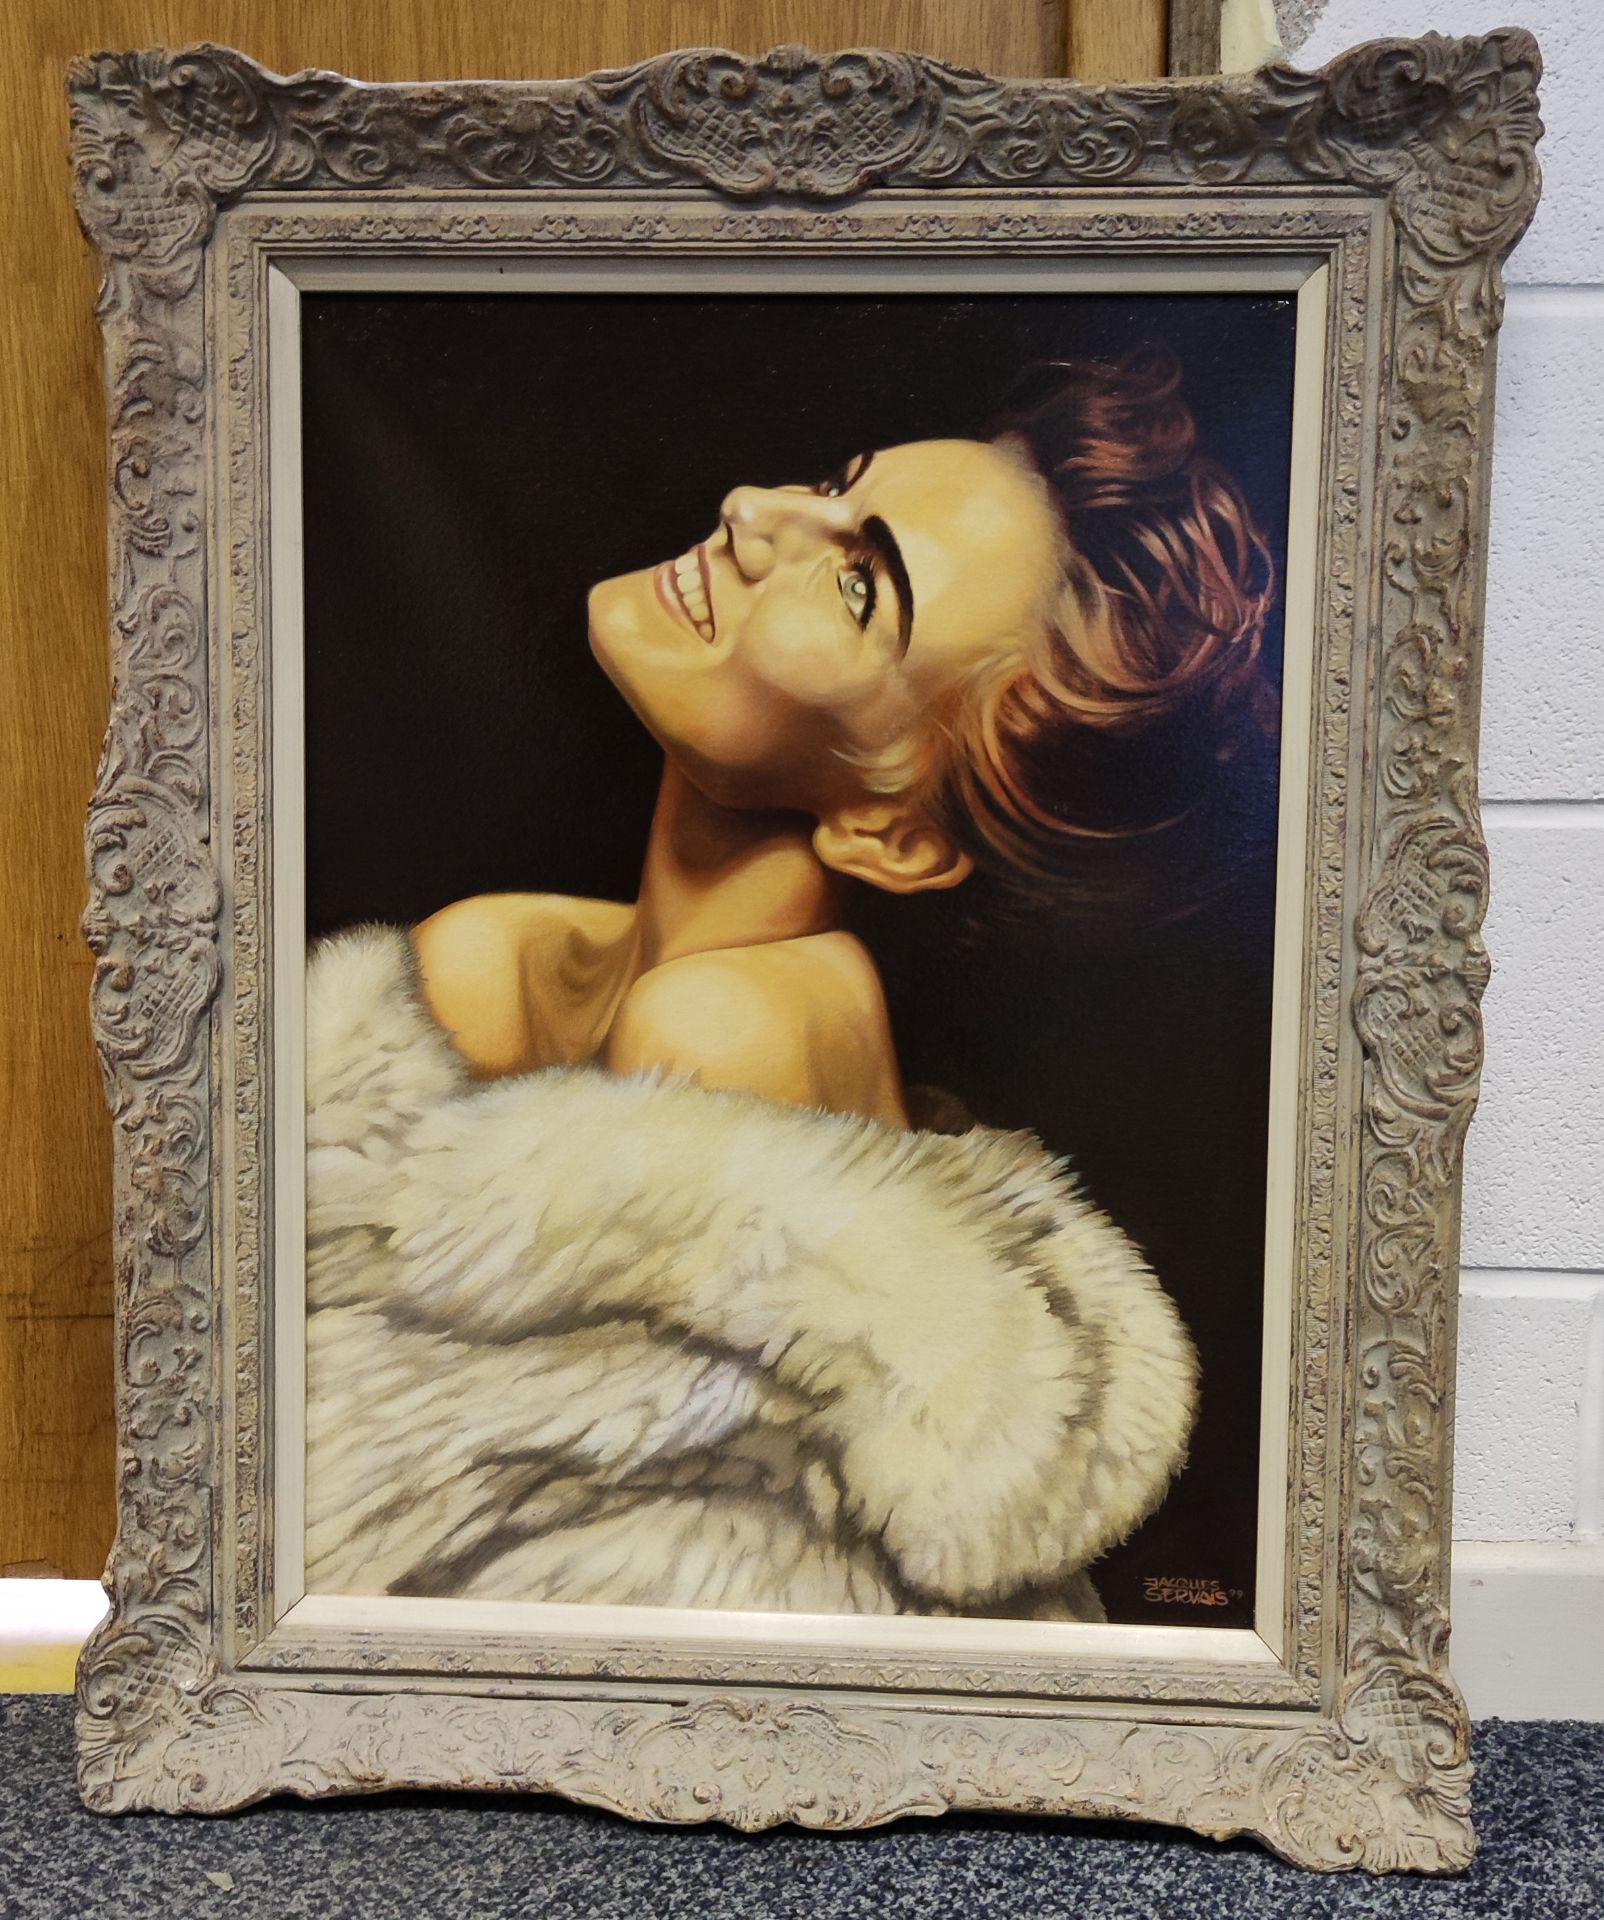 1 x Original Oil Painting On Canvas of Lady in Fur Coat by Jacques Servais